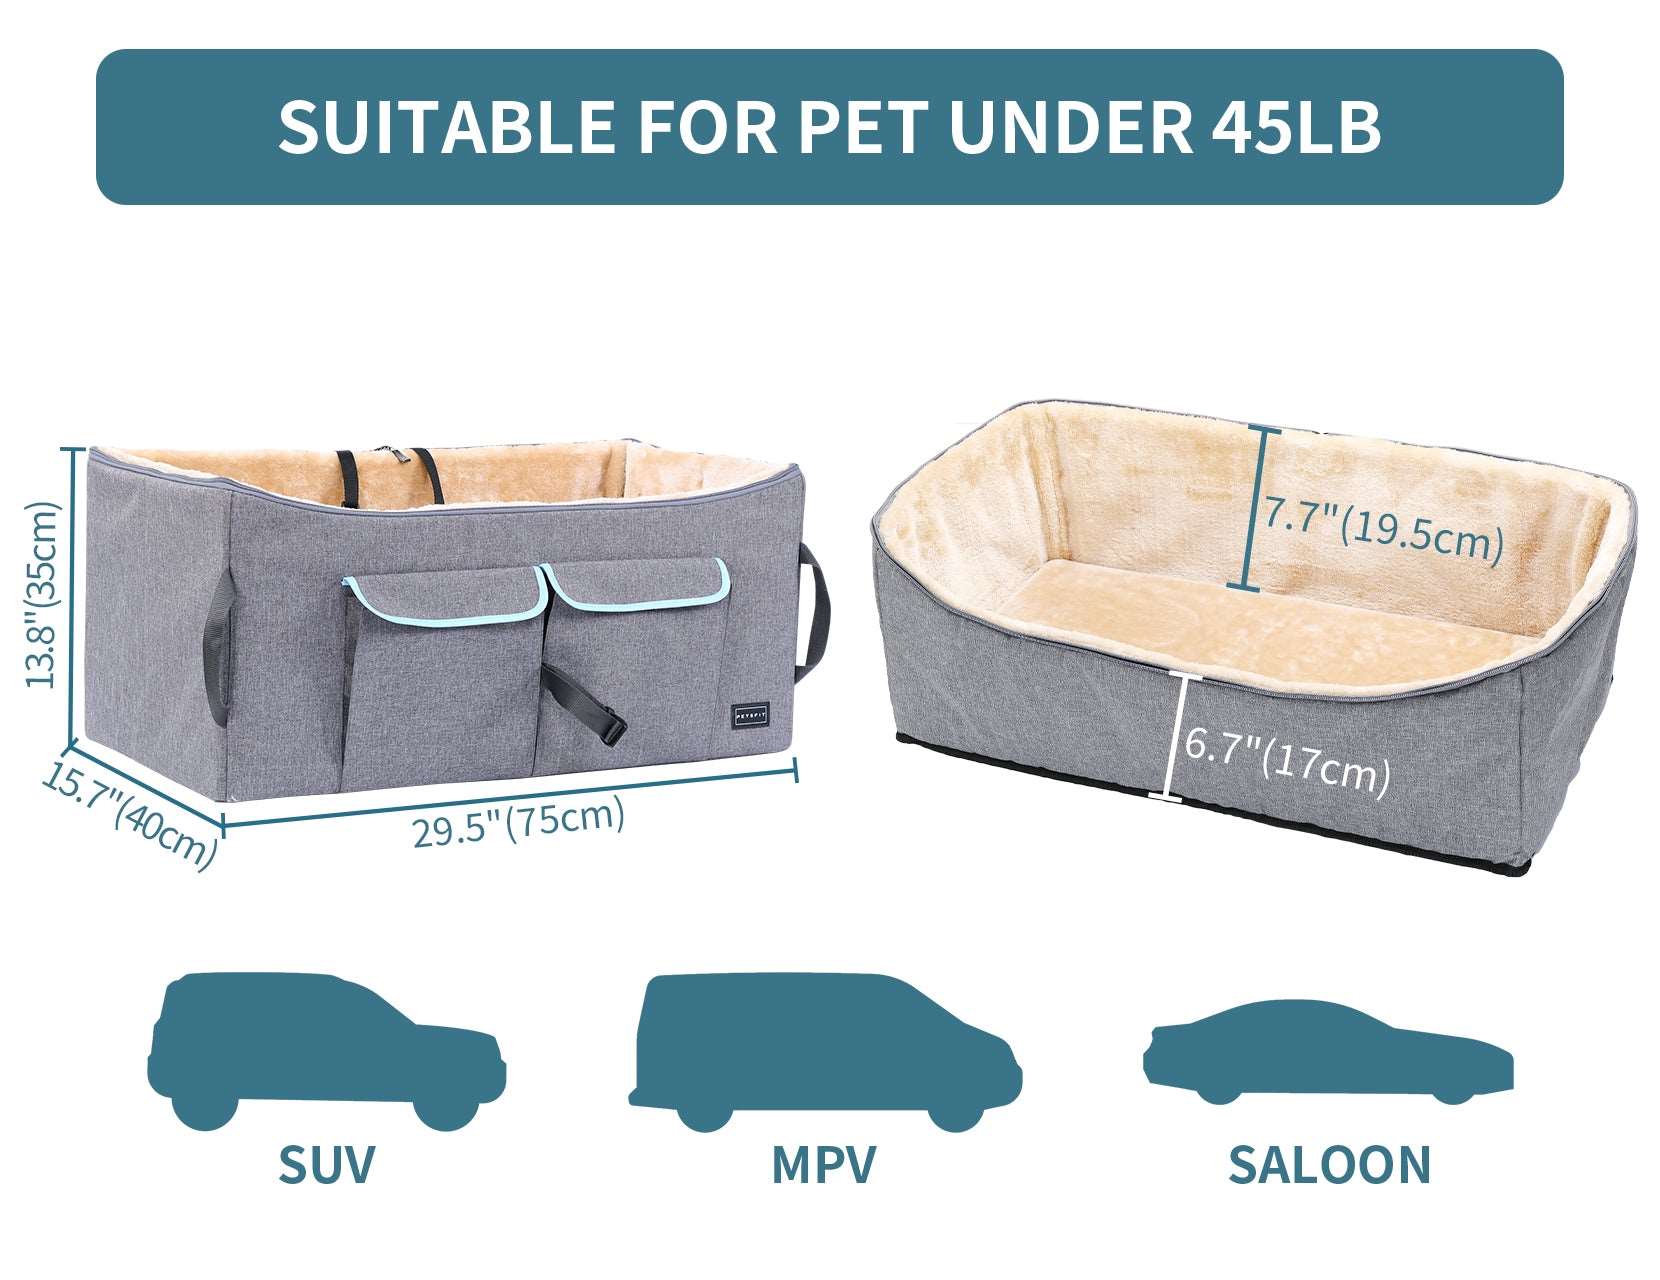 Petsfit-Dog-Car-Seat-Pet-Travel-Car-Booster-Seat-with-Safety-Belt-05